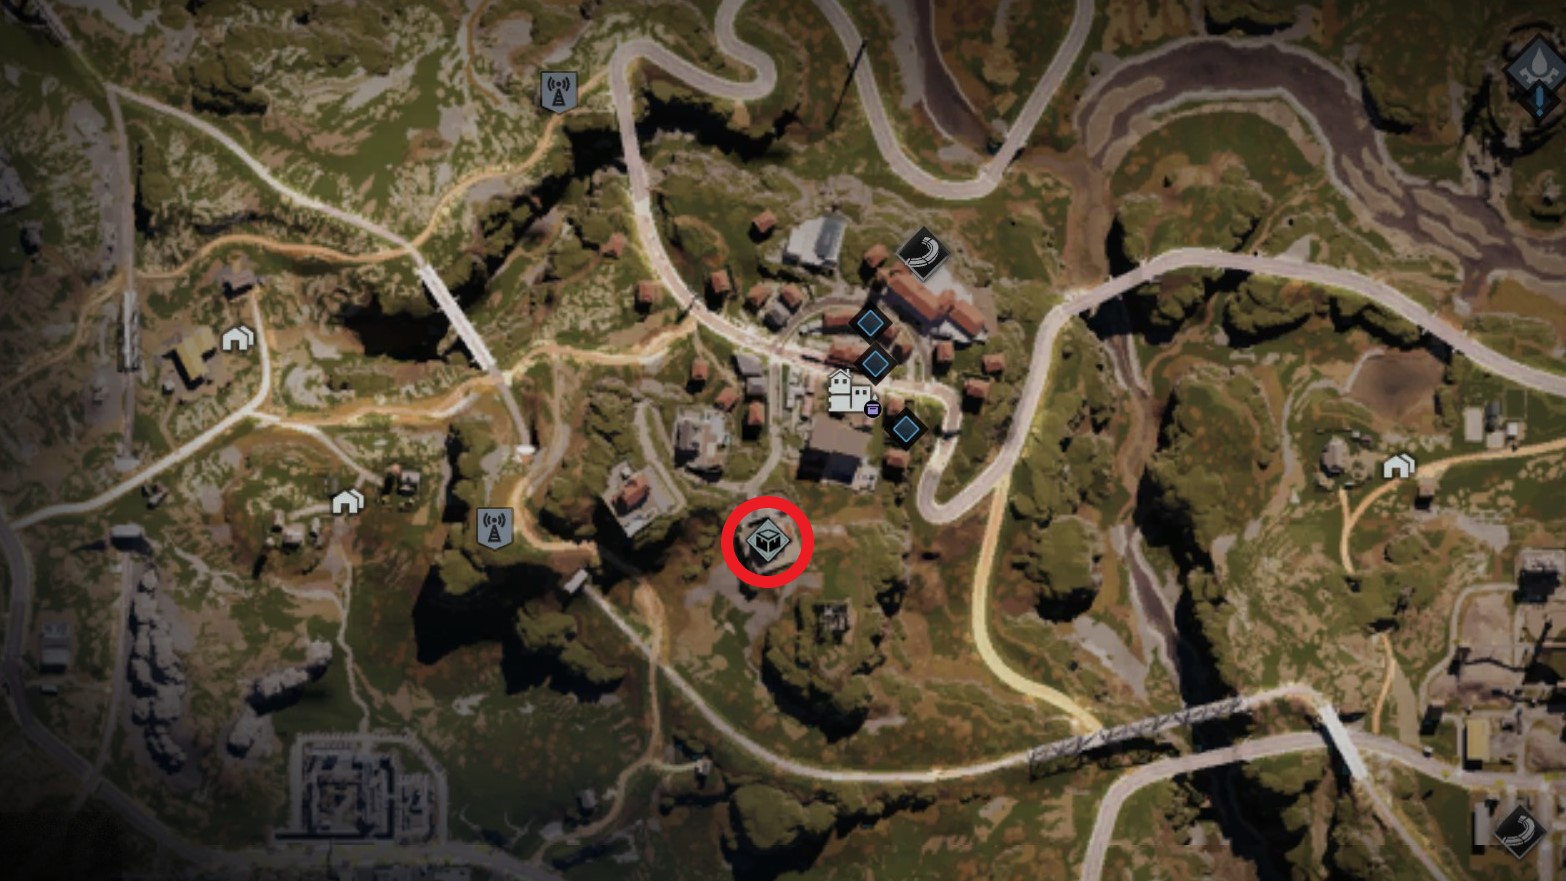 Once Human High Banks weapon crate location